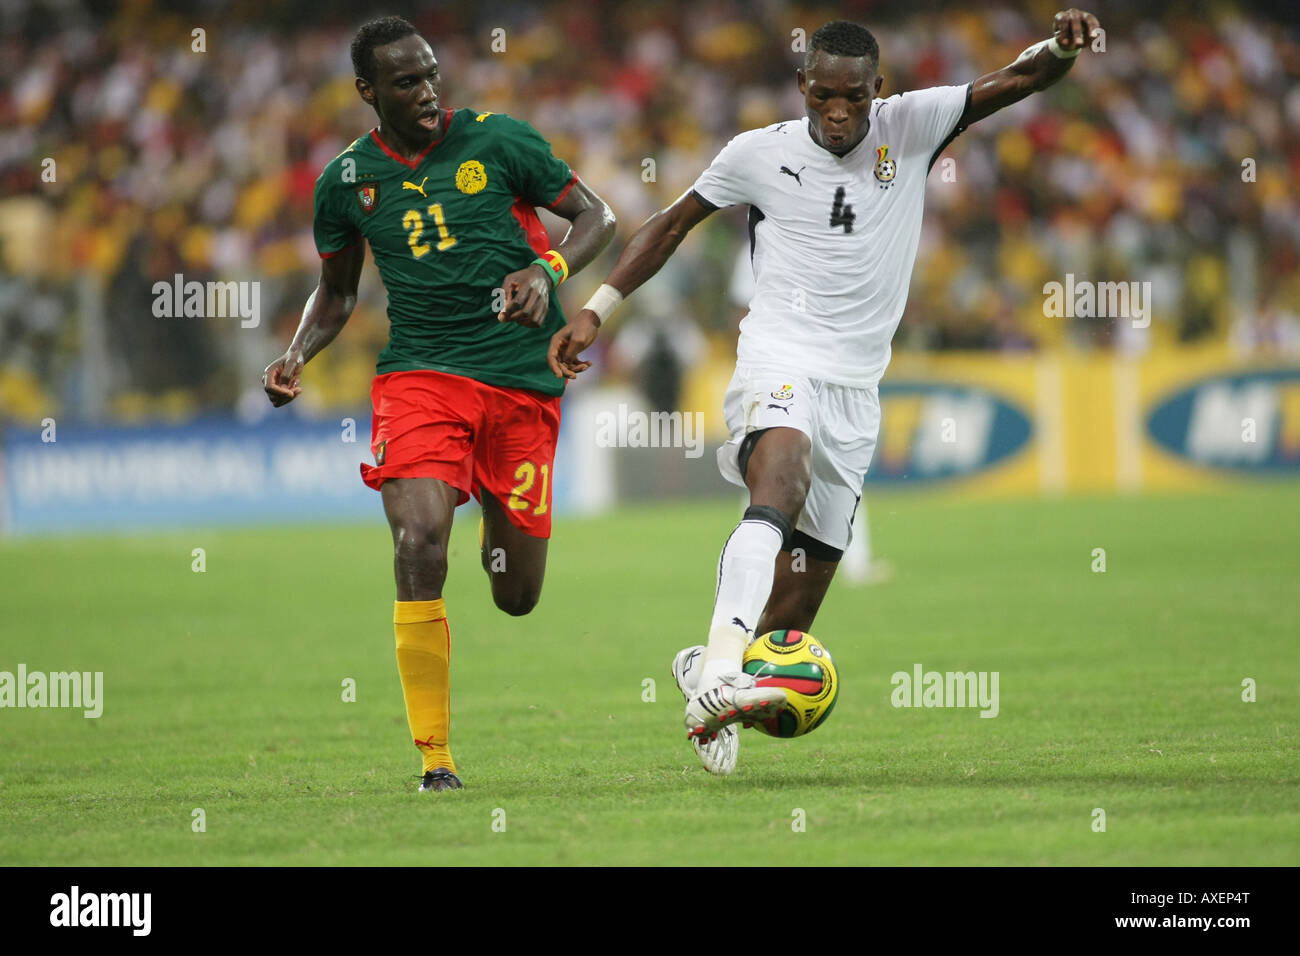 Ghana vs. Cameroon, Africa Cup of Nations 2008 Stock Photo